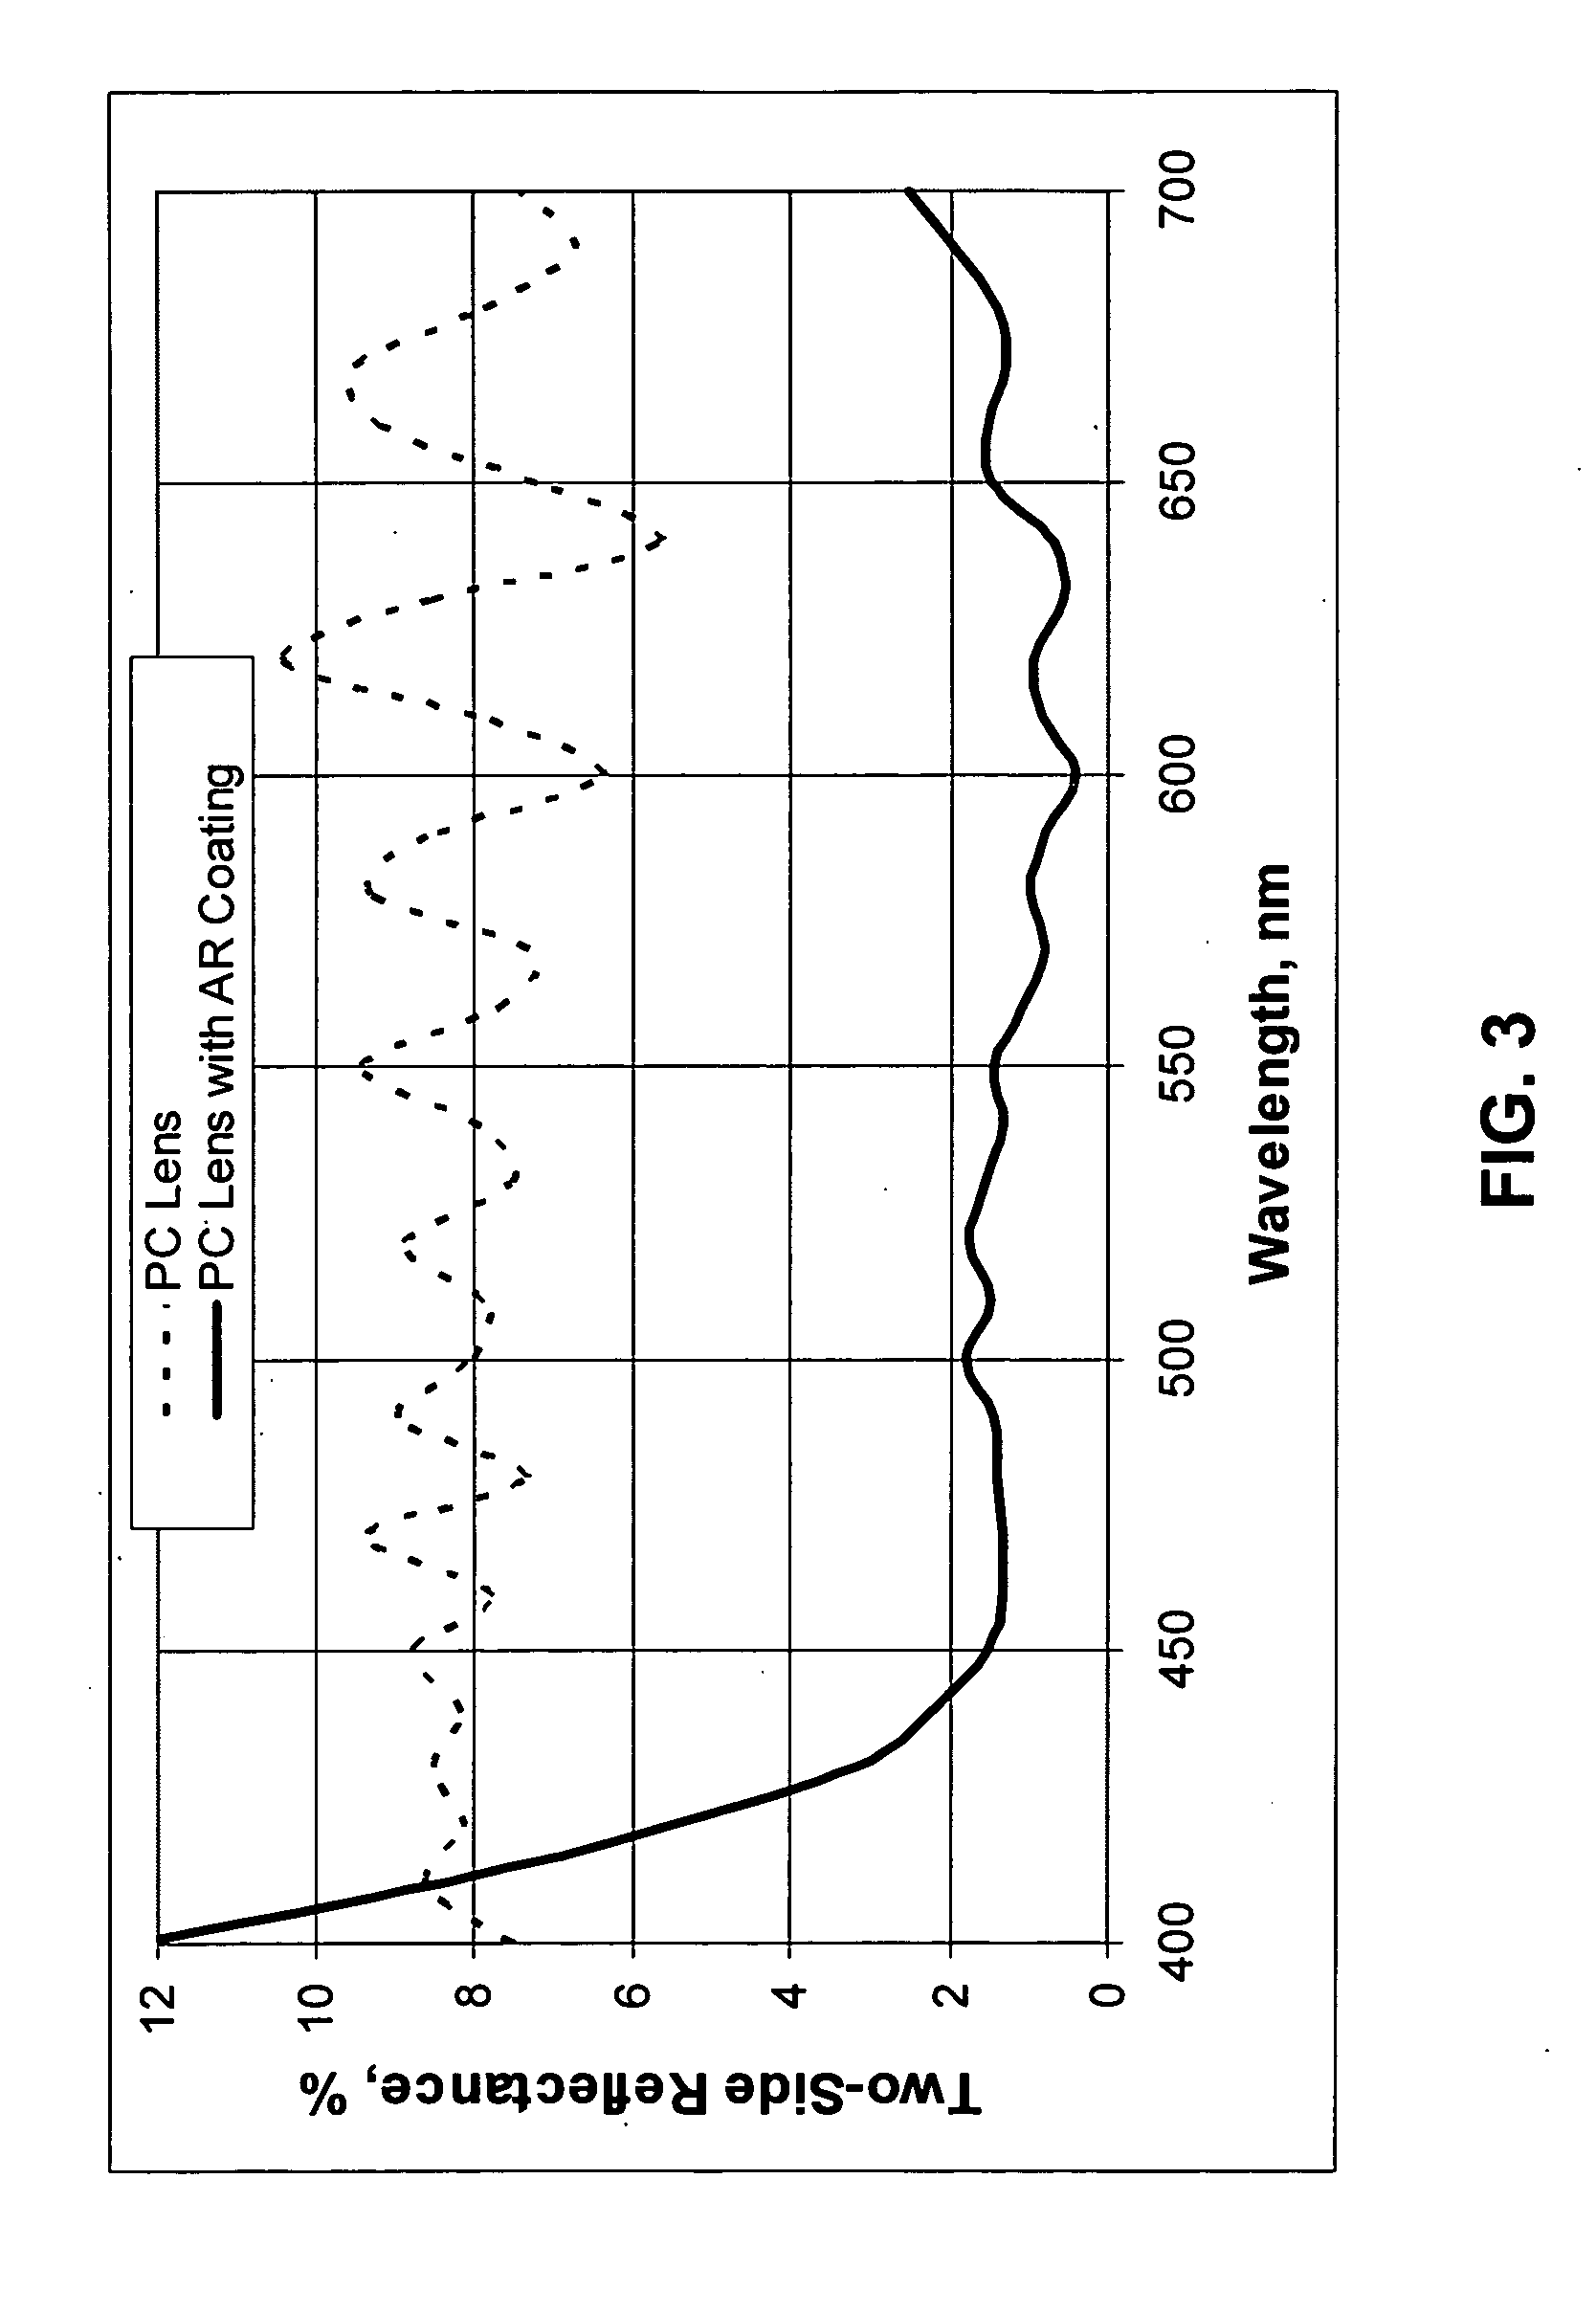 Antireflective coating compositions and methods for depositing such coatings